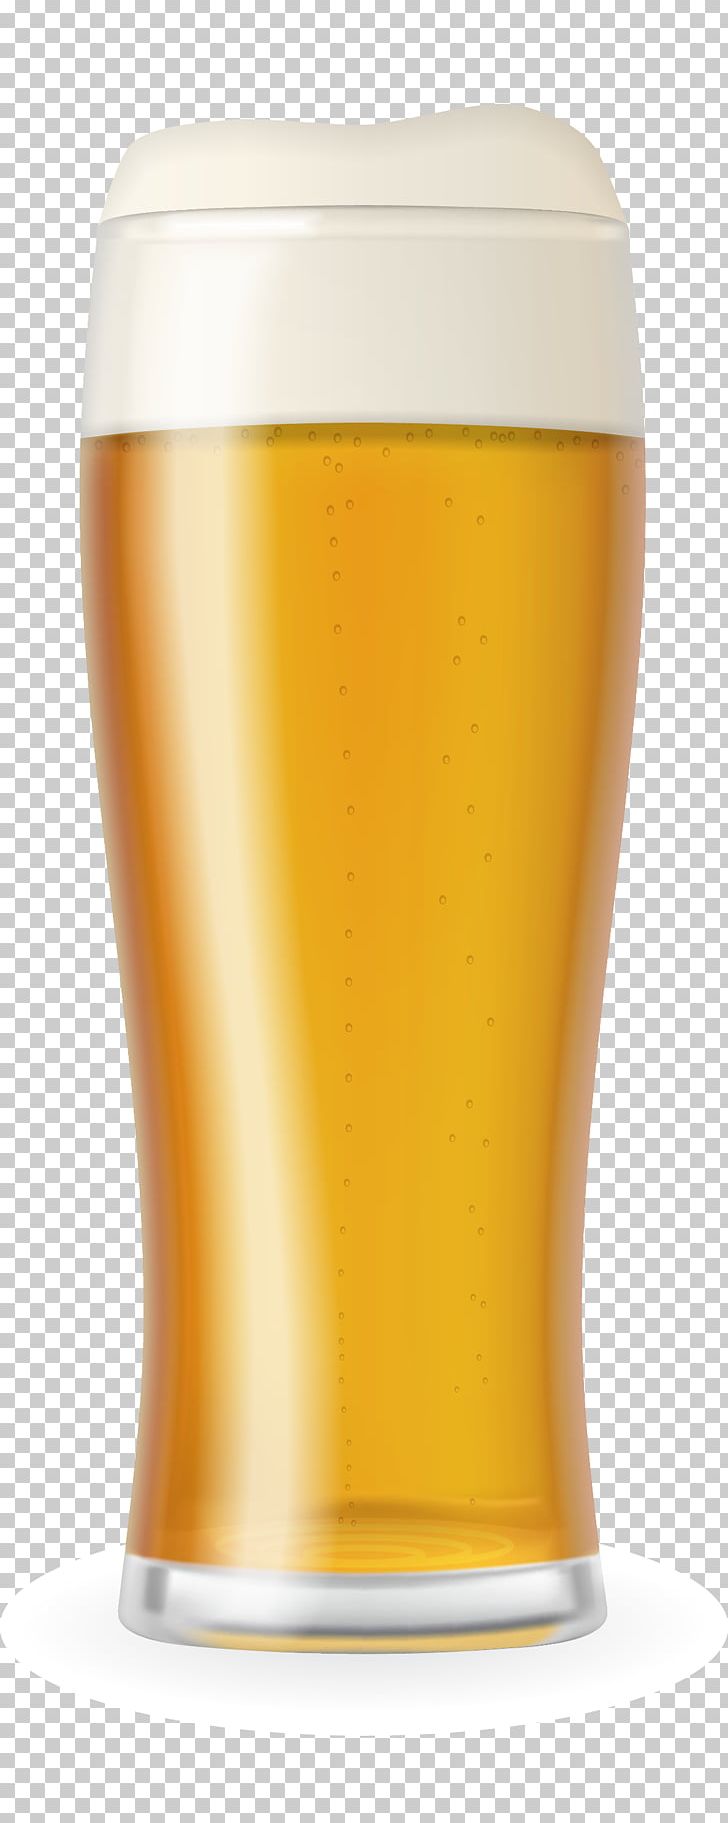 Wheat Beer Pint Glass Beer Glasses PNG, Clipart, Beer, Beer Glass, Beer Glasses, Common Wheat, Cup Free PNG Download